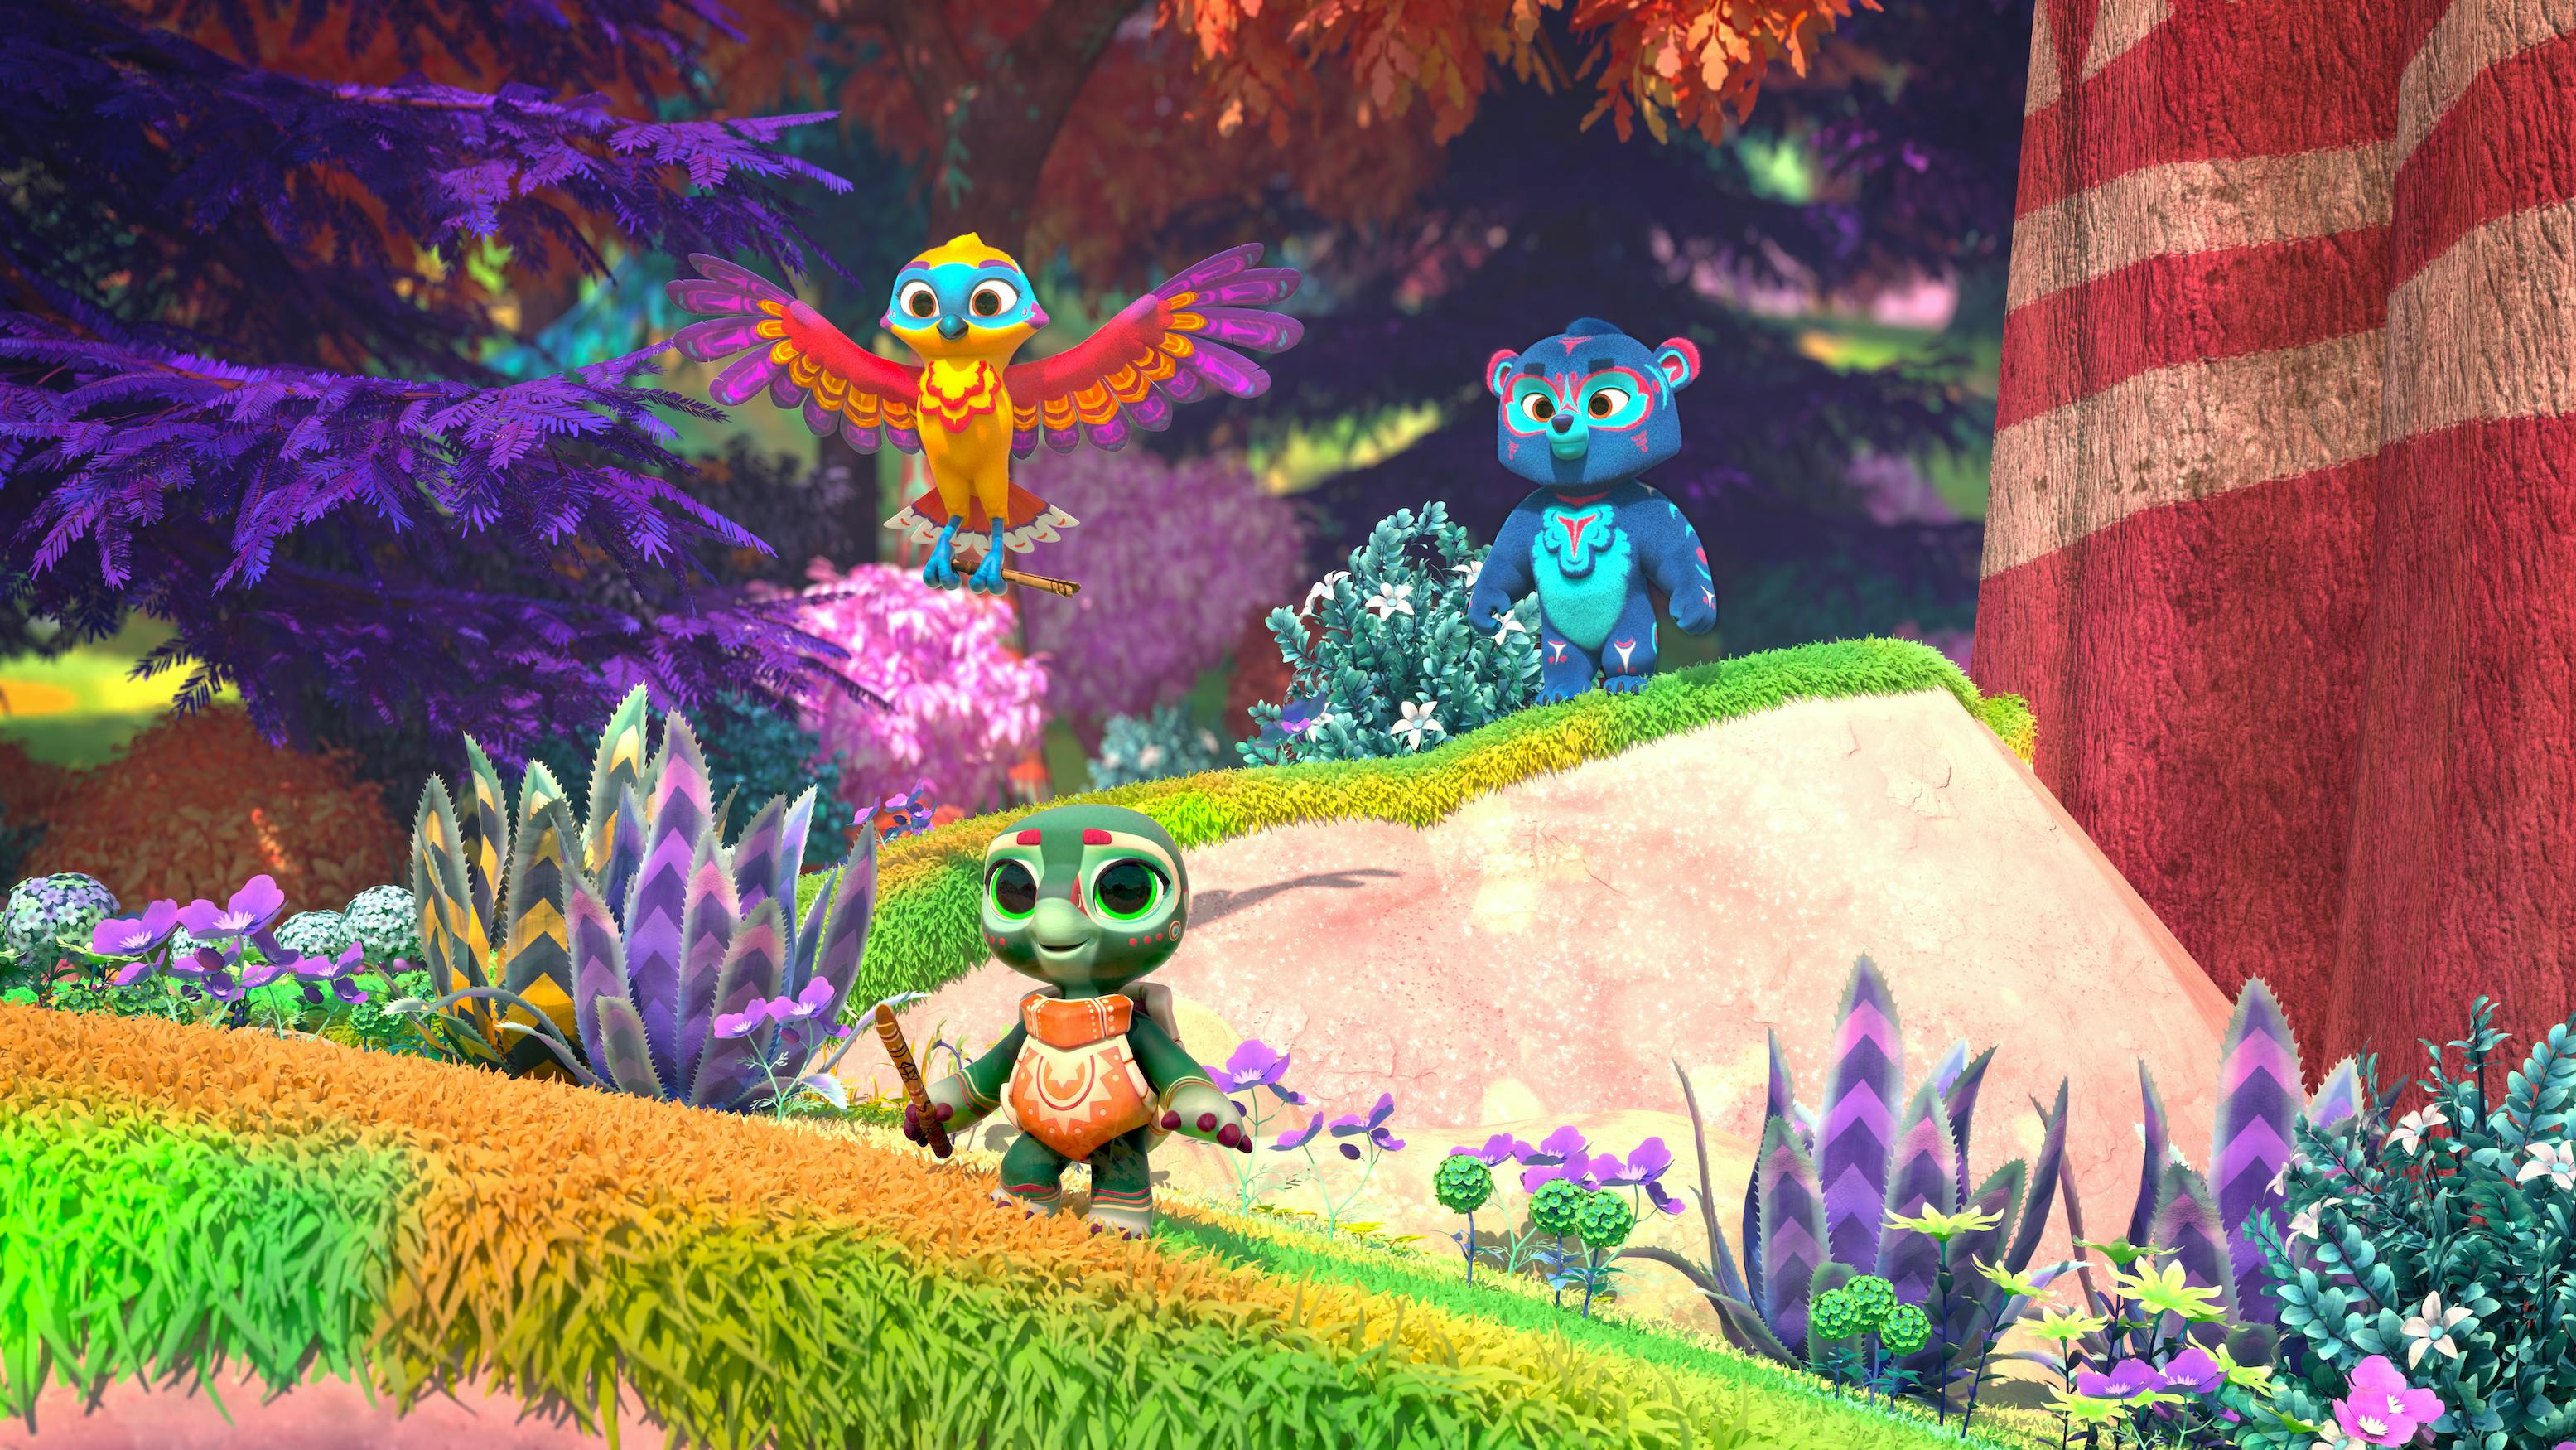 Hawk, bear and turtle from Spirit Rangers play in a vibrantly colored world.